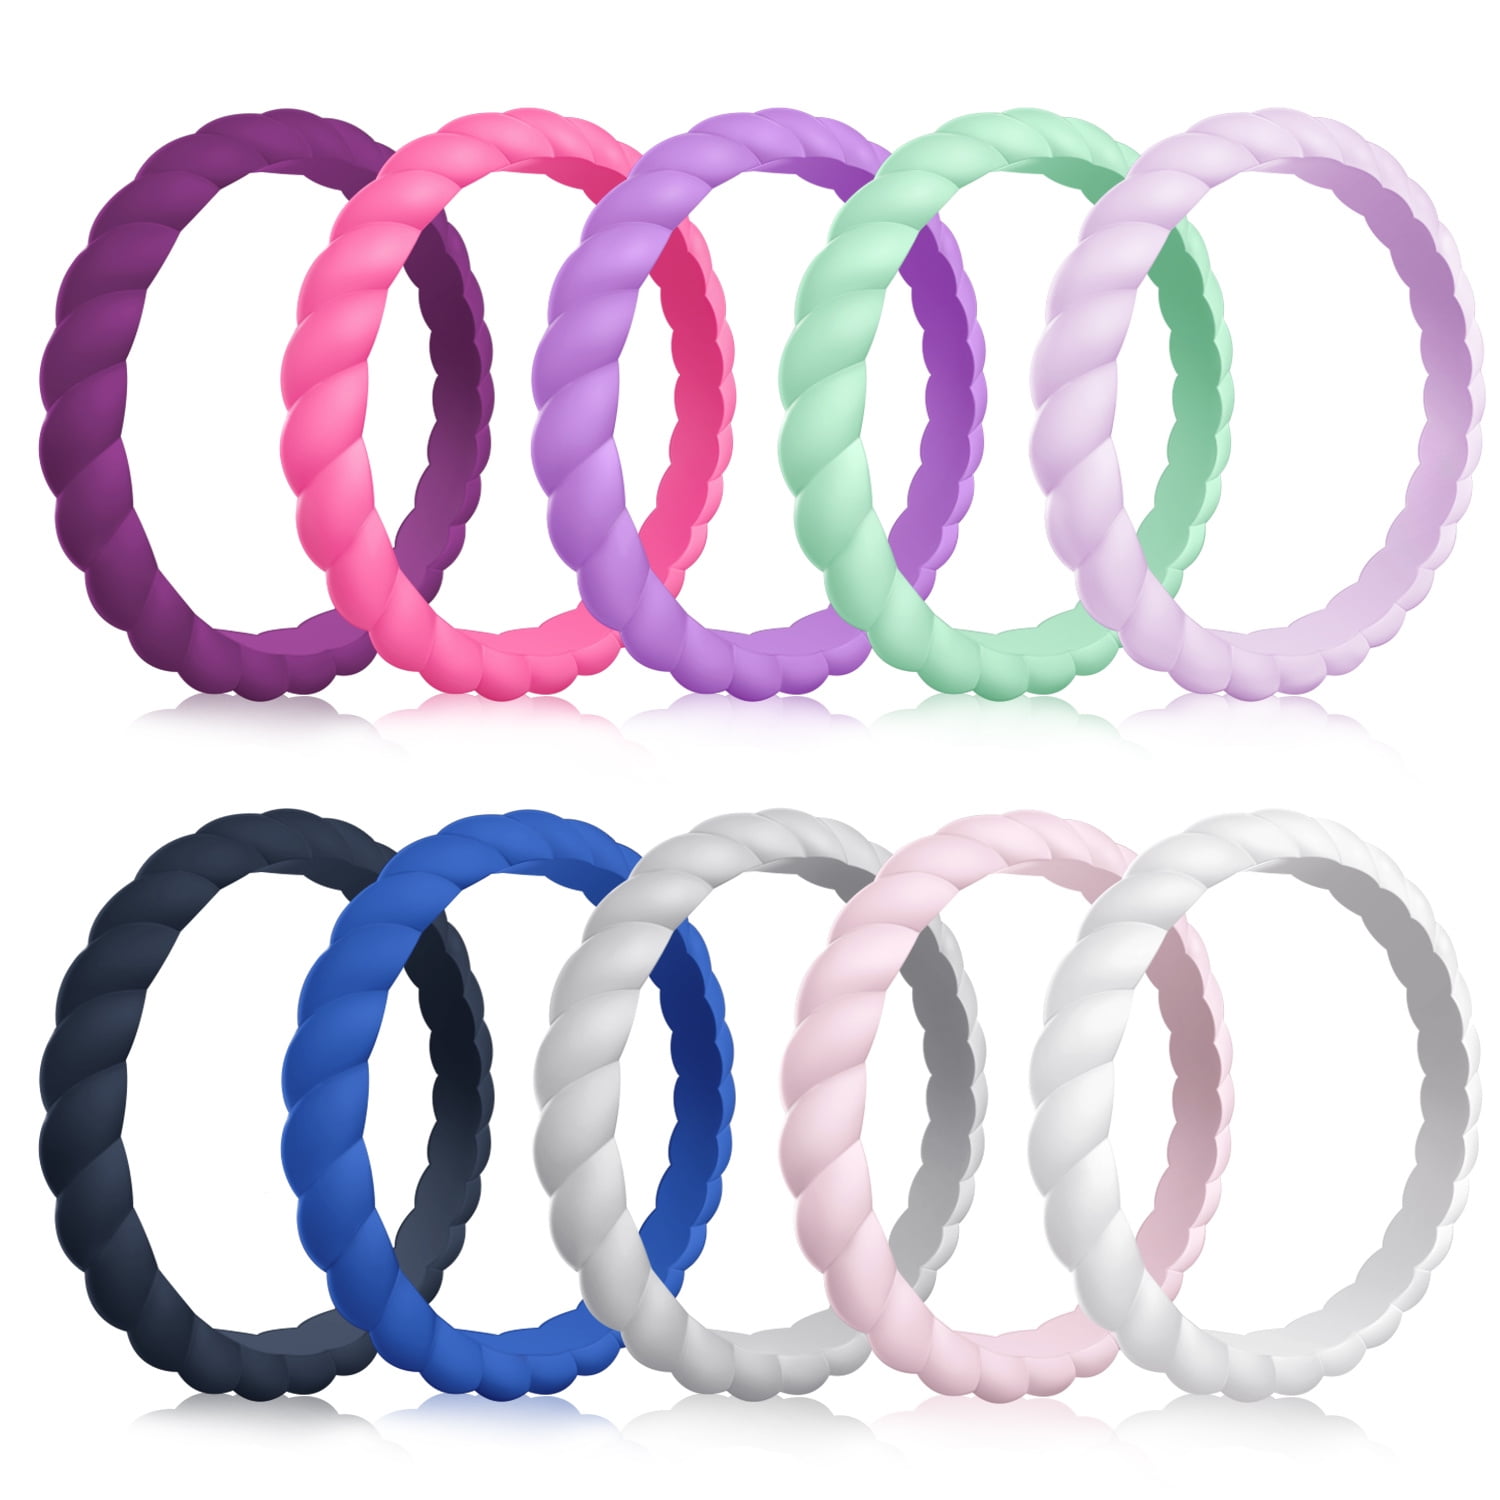 ThunderFit Silicone Rings for Men Beveled Rubber Wedding Bands 9mm 7.5mm 6mm Width 